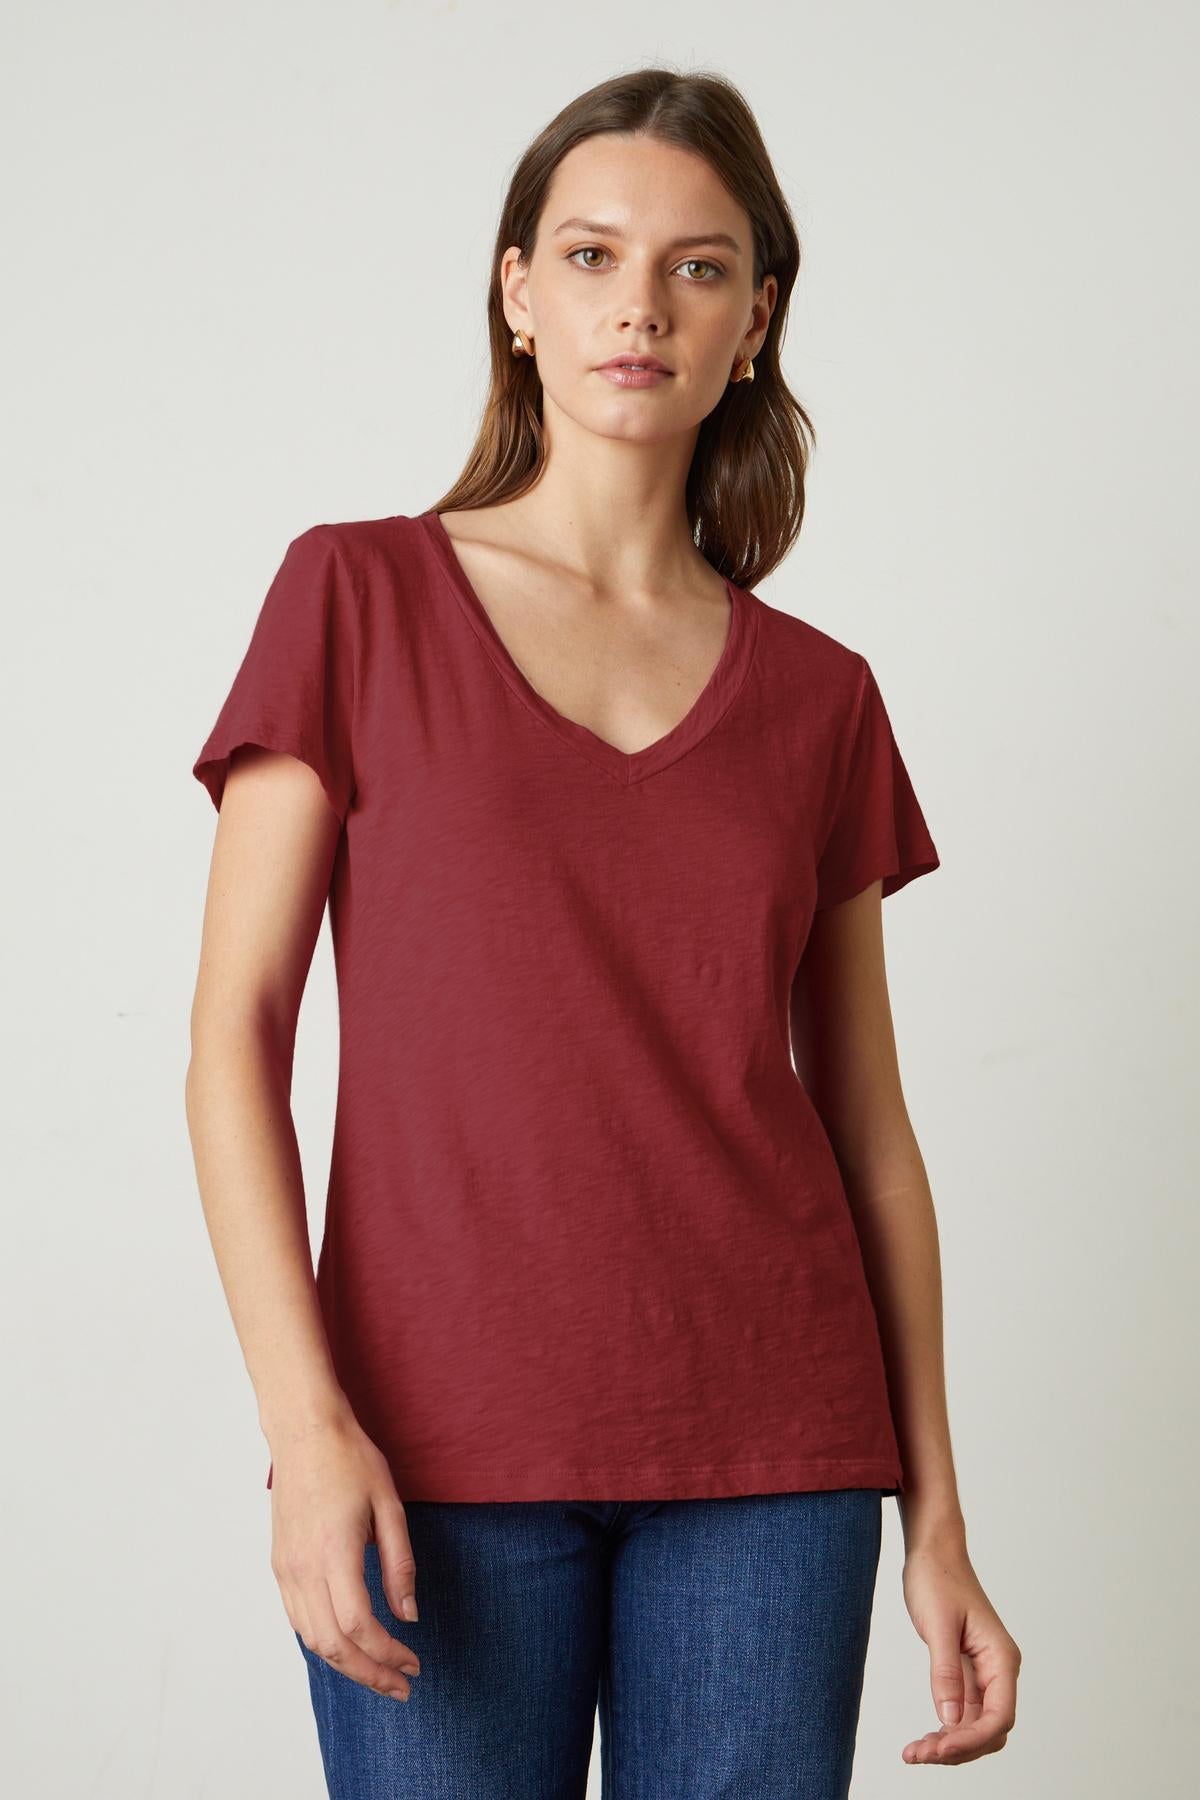 A preppy woman donning a Velvet by Graham & Spencer LILITH COTTON SLUB V-NECK TEE.-35782982238401